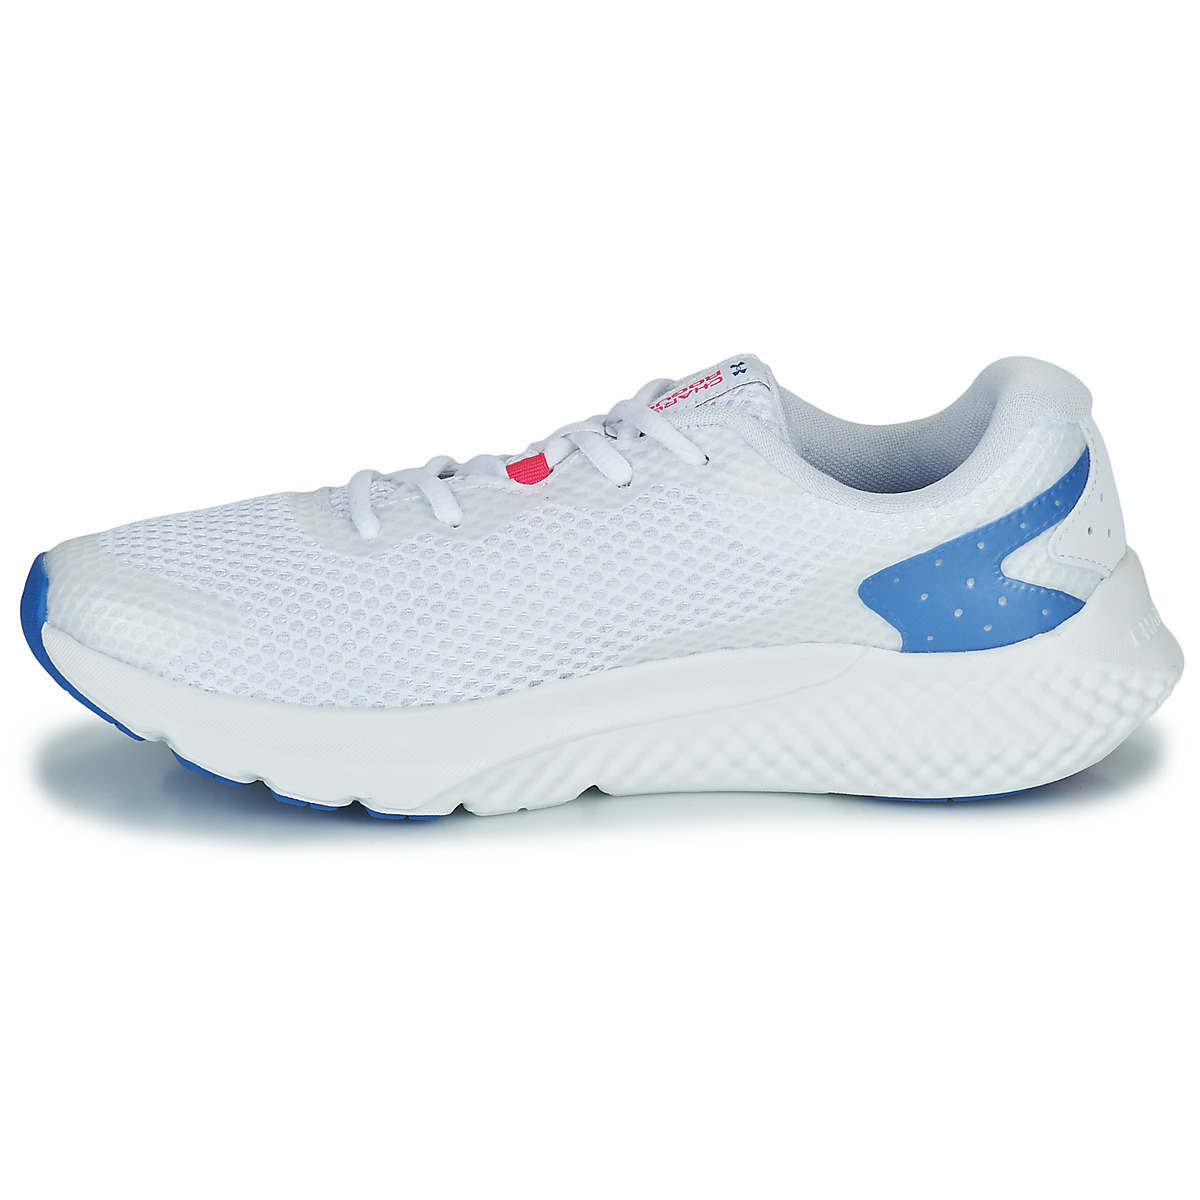 UNDER ARMOUR W Charged Rogue 3 IRID 3025756-101